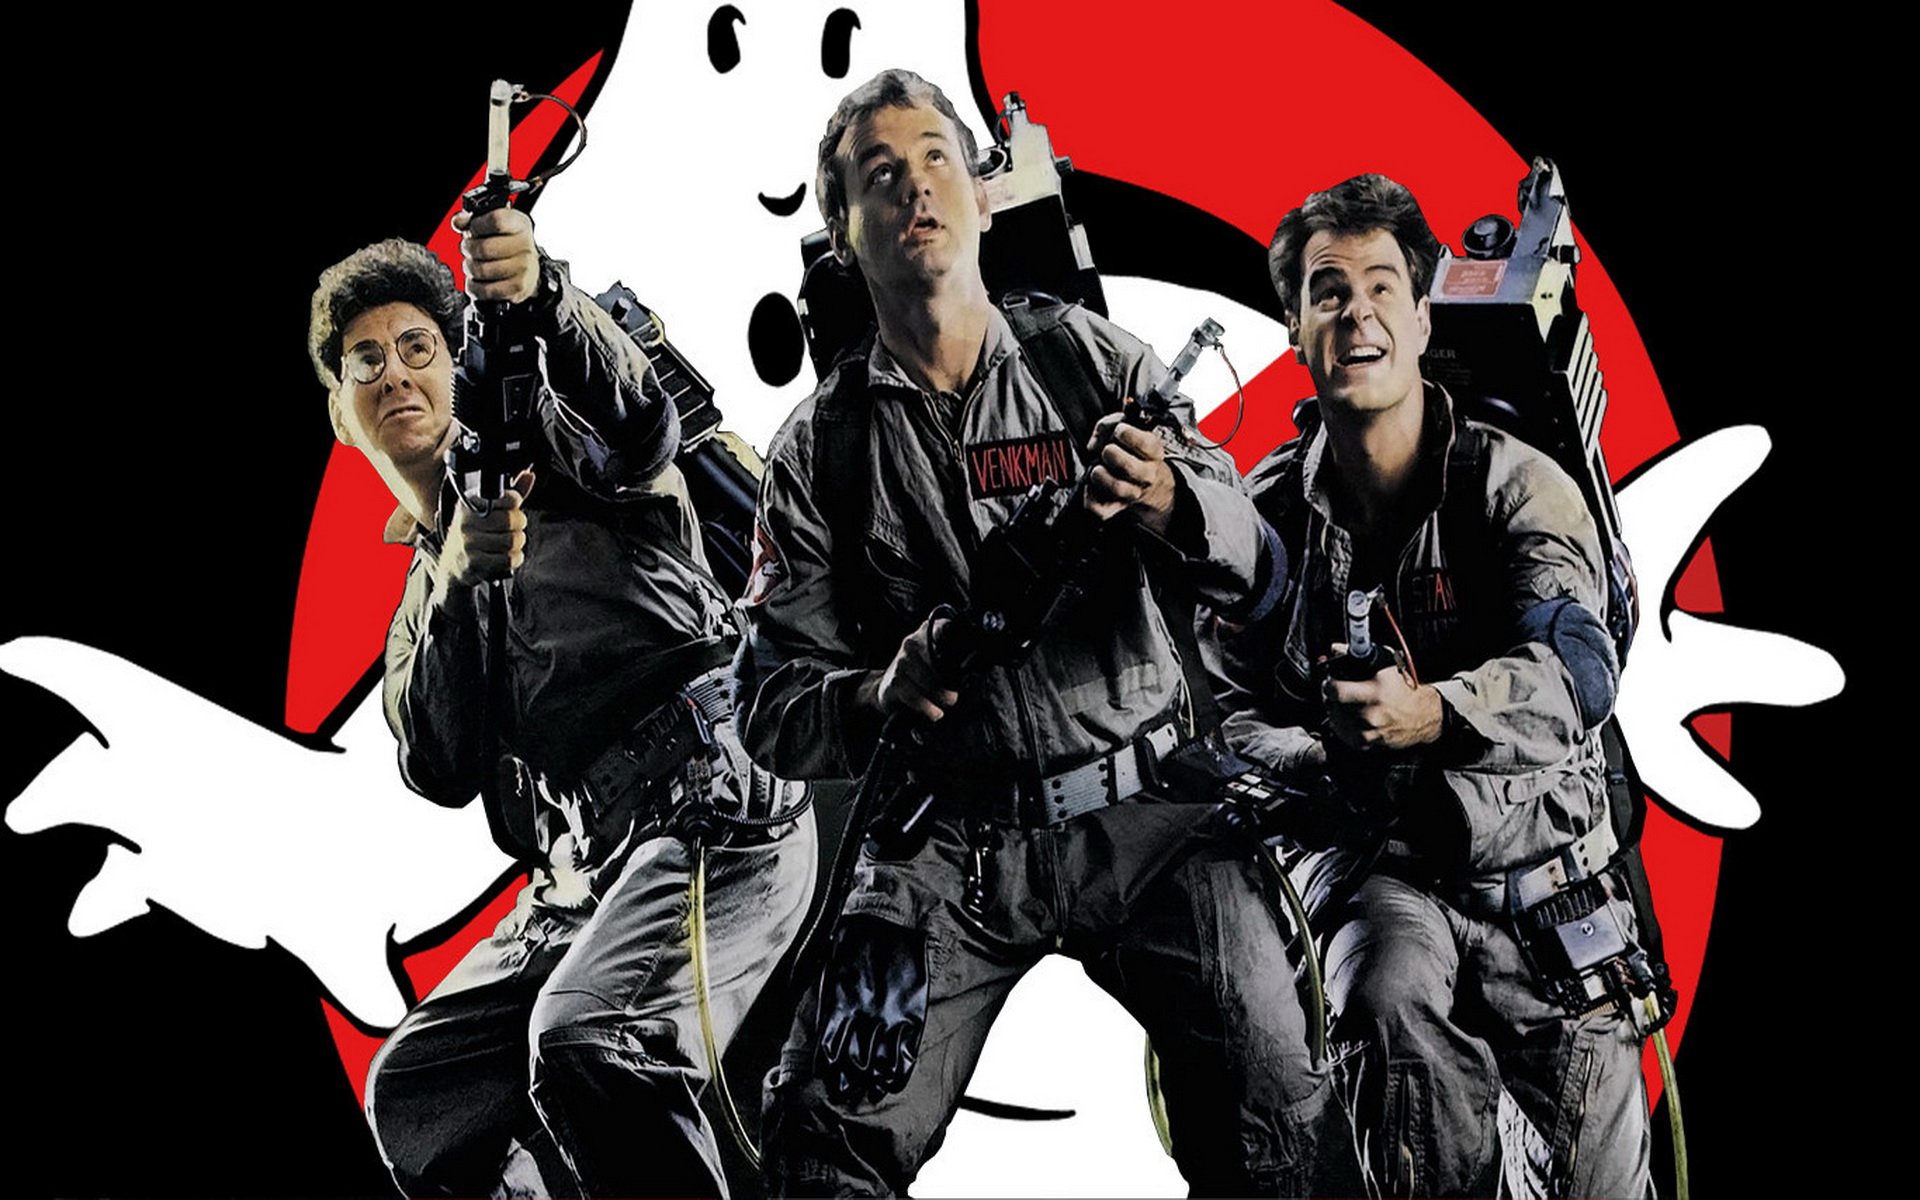 ghostbusters, Action, Adventure, Supernatural, Comedy, Ghost Wallpaper